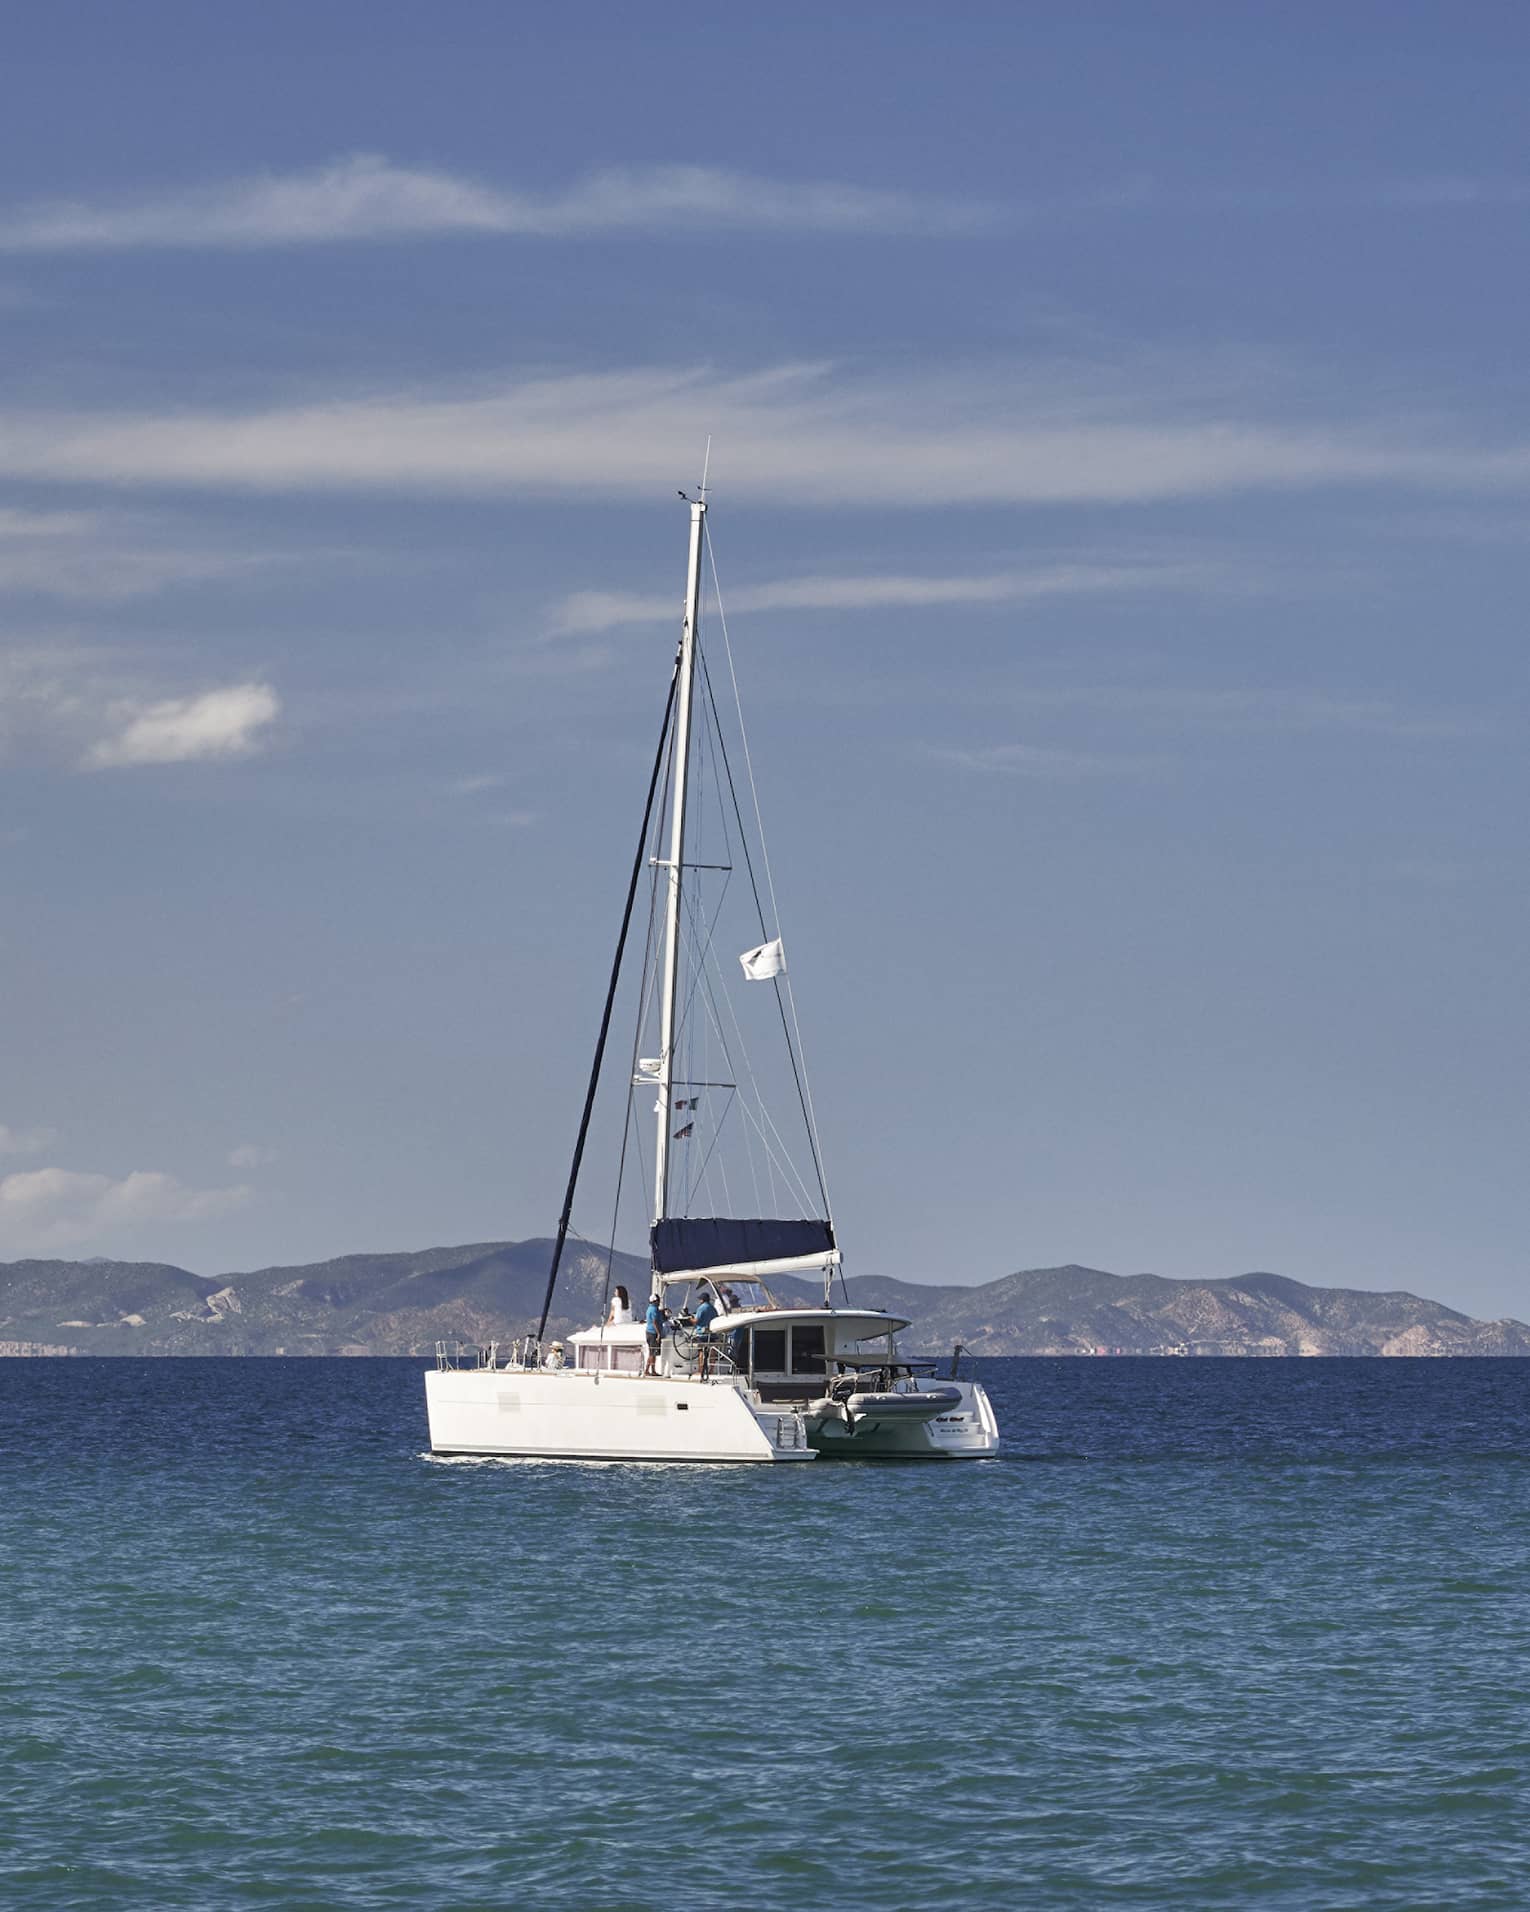 A boat sailing on the ocean with mountains in the distance.